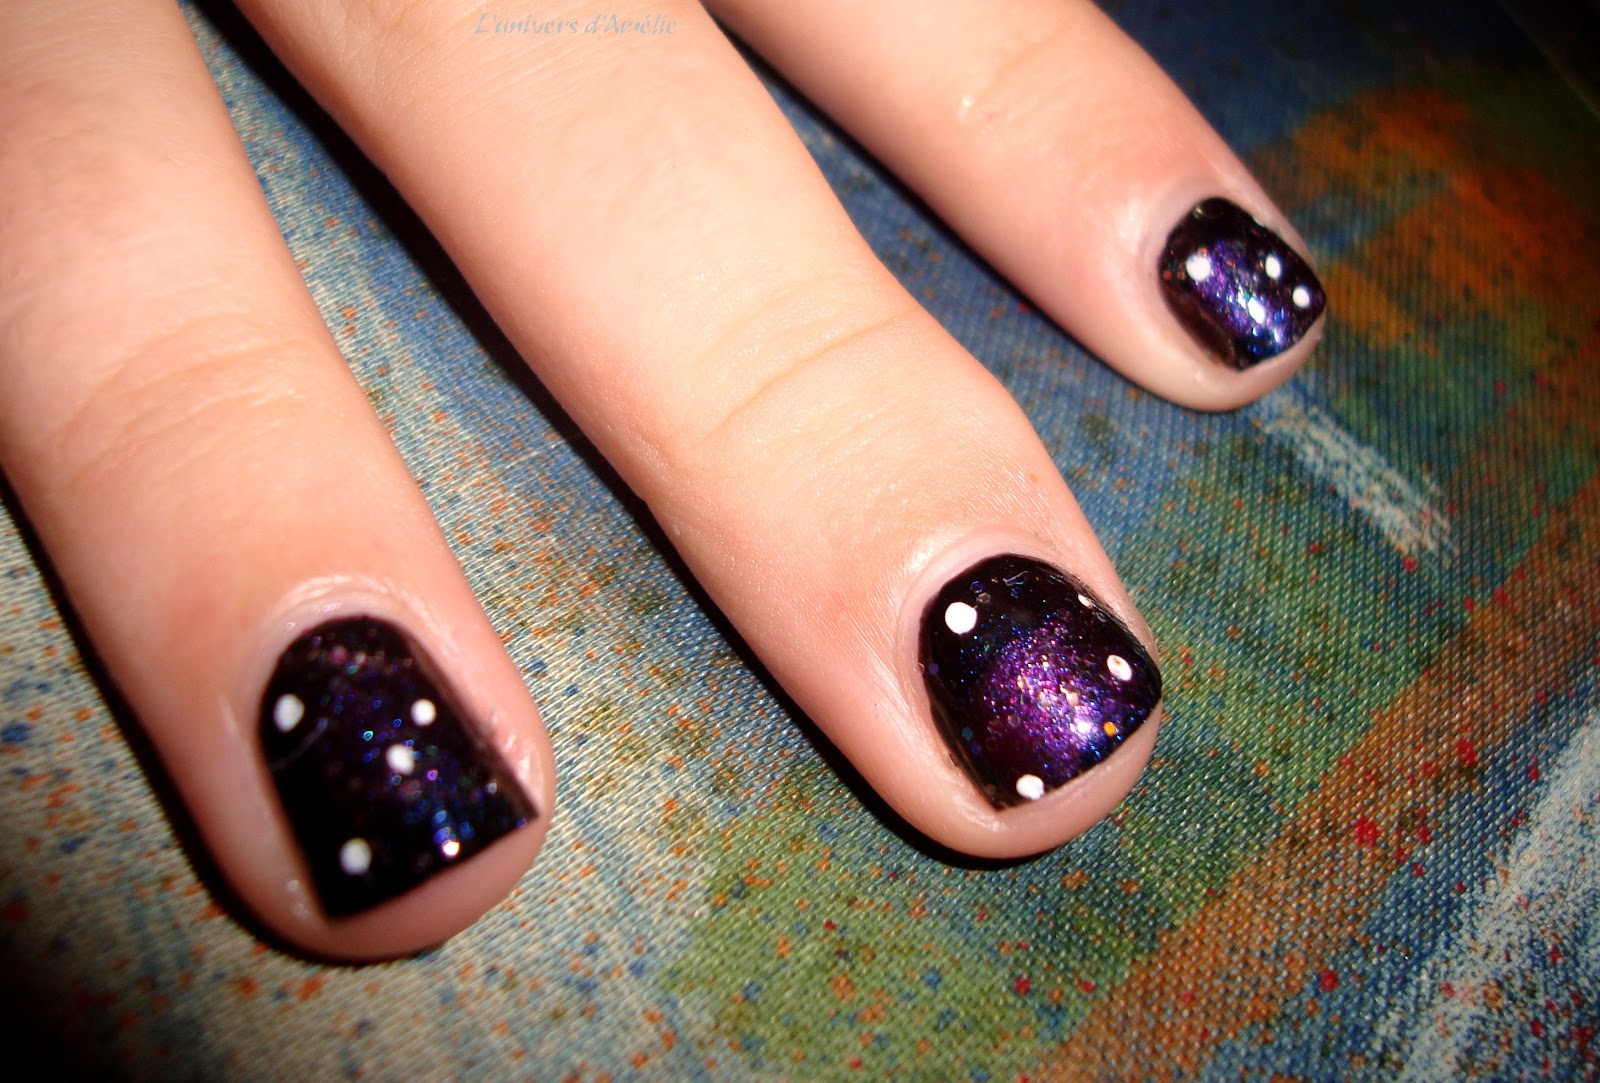 4. Step-by-Step Guide to DIY Galaxy Nail Art Design - wide 7